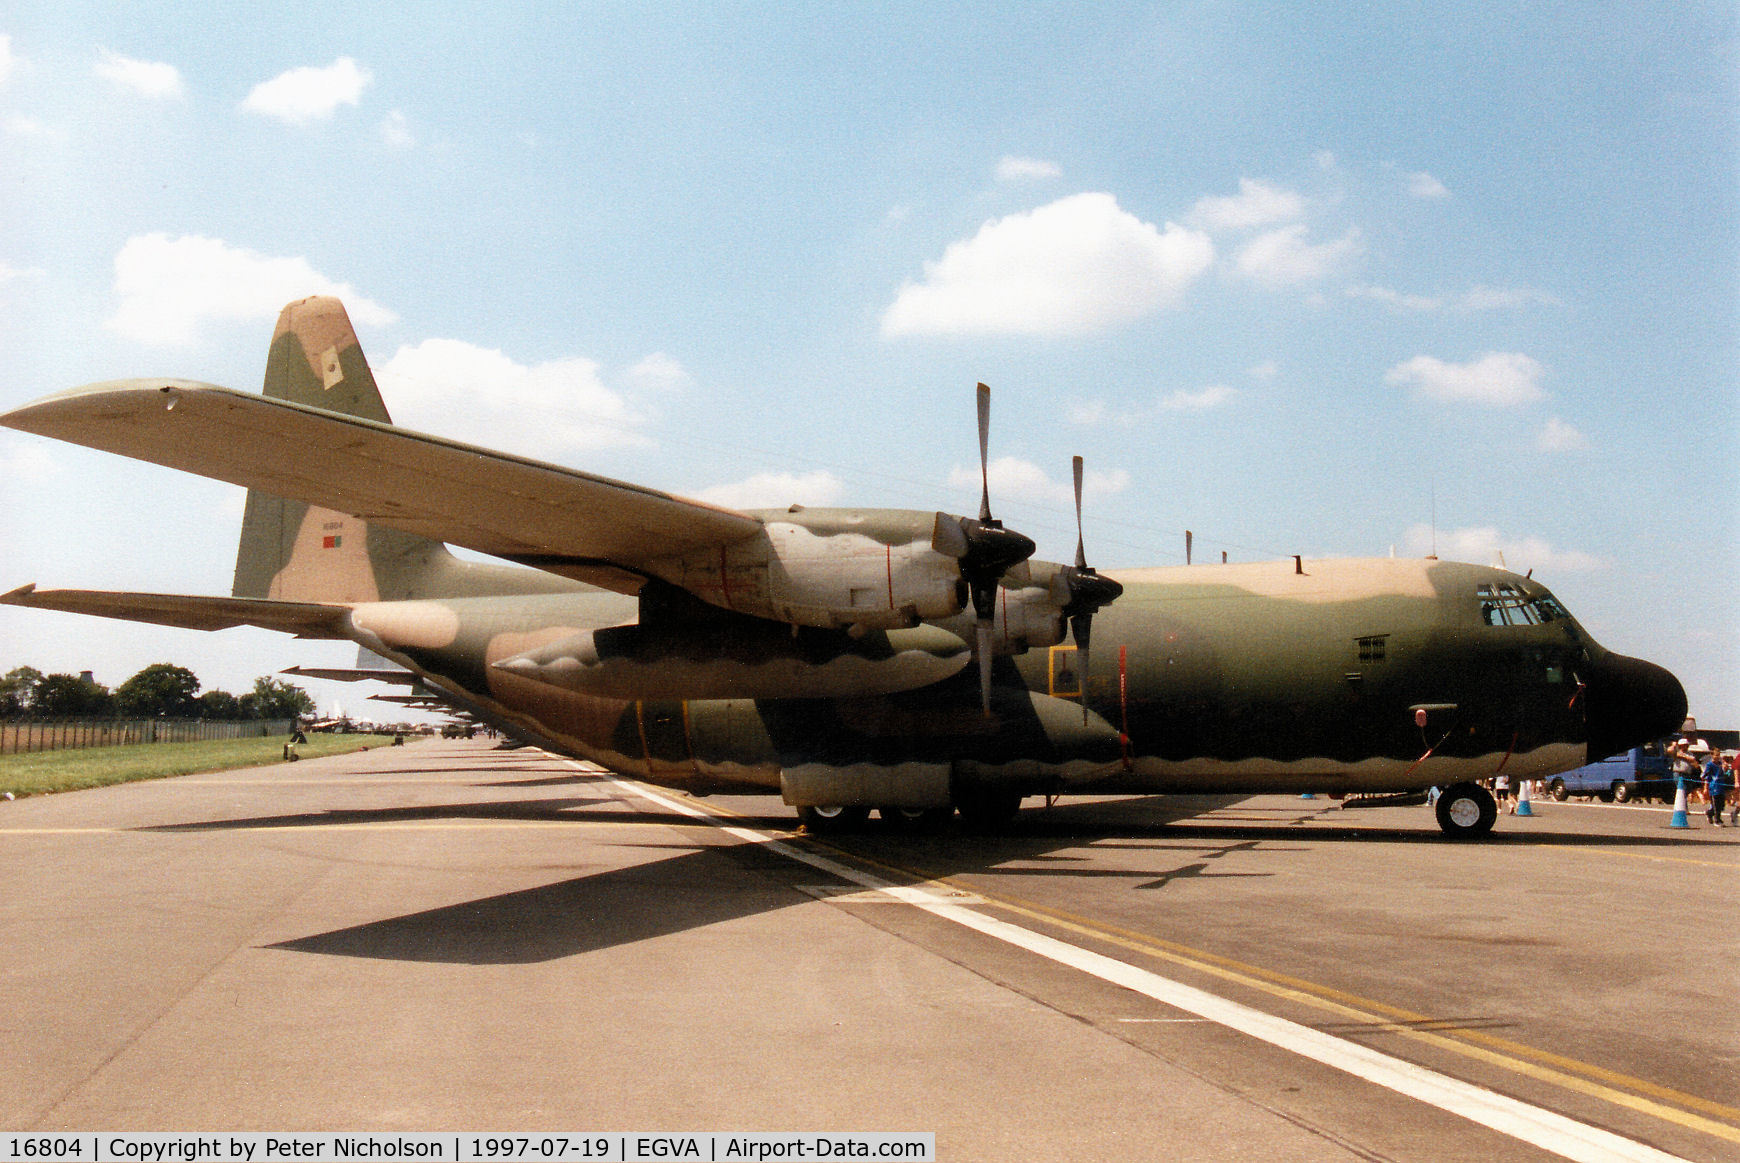 16804, Lockheed C-130H Hercules C/N 382-4777, C-130H Hercules of 501 Squadron Portuguese Air Force on display at the 1997 Intnl Air Tattoo at RAF Fairford.